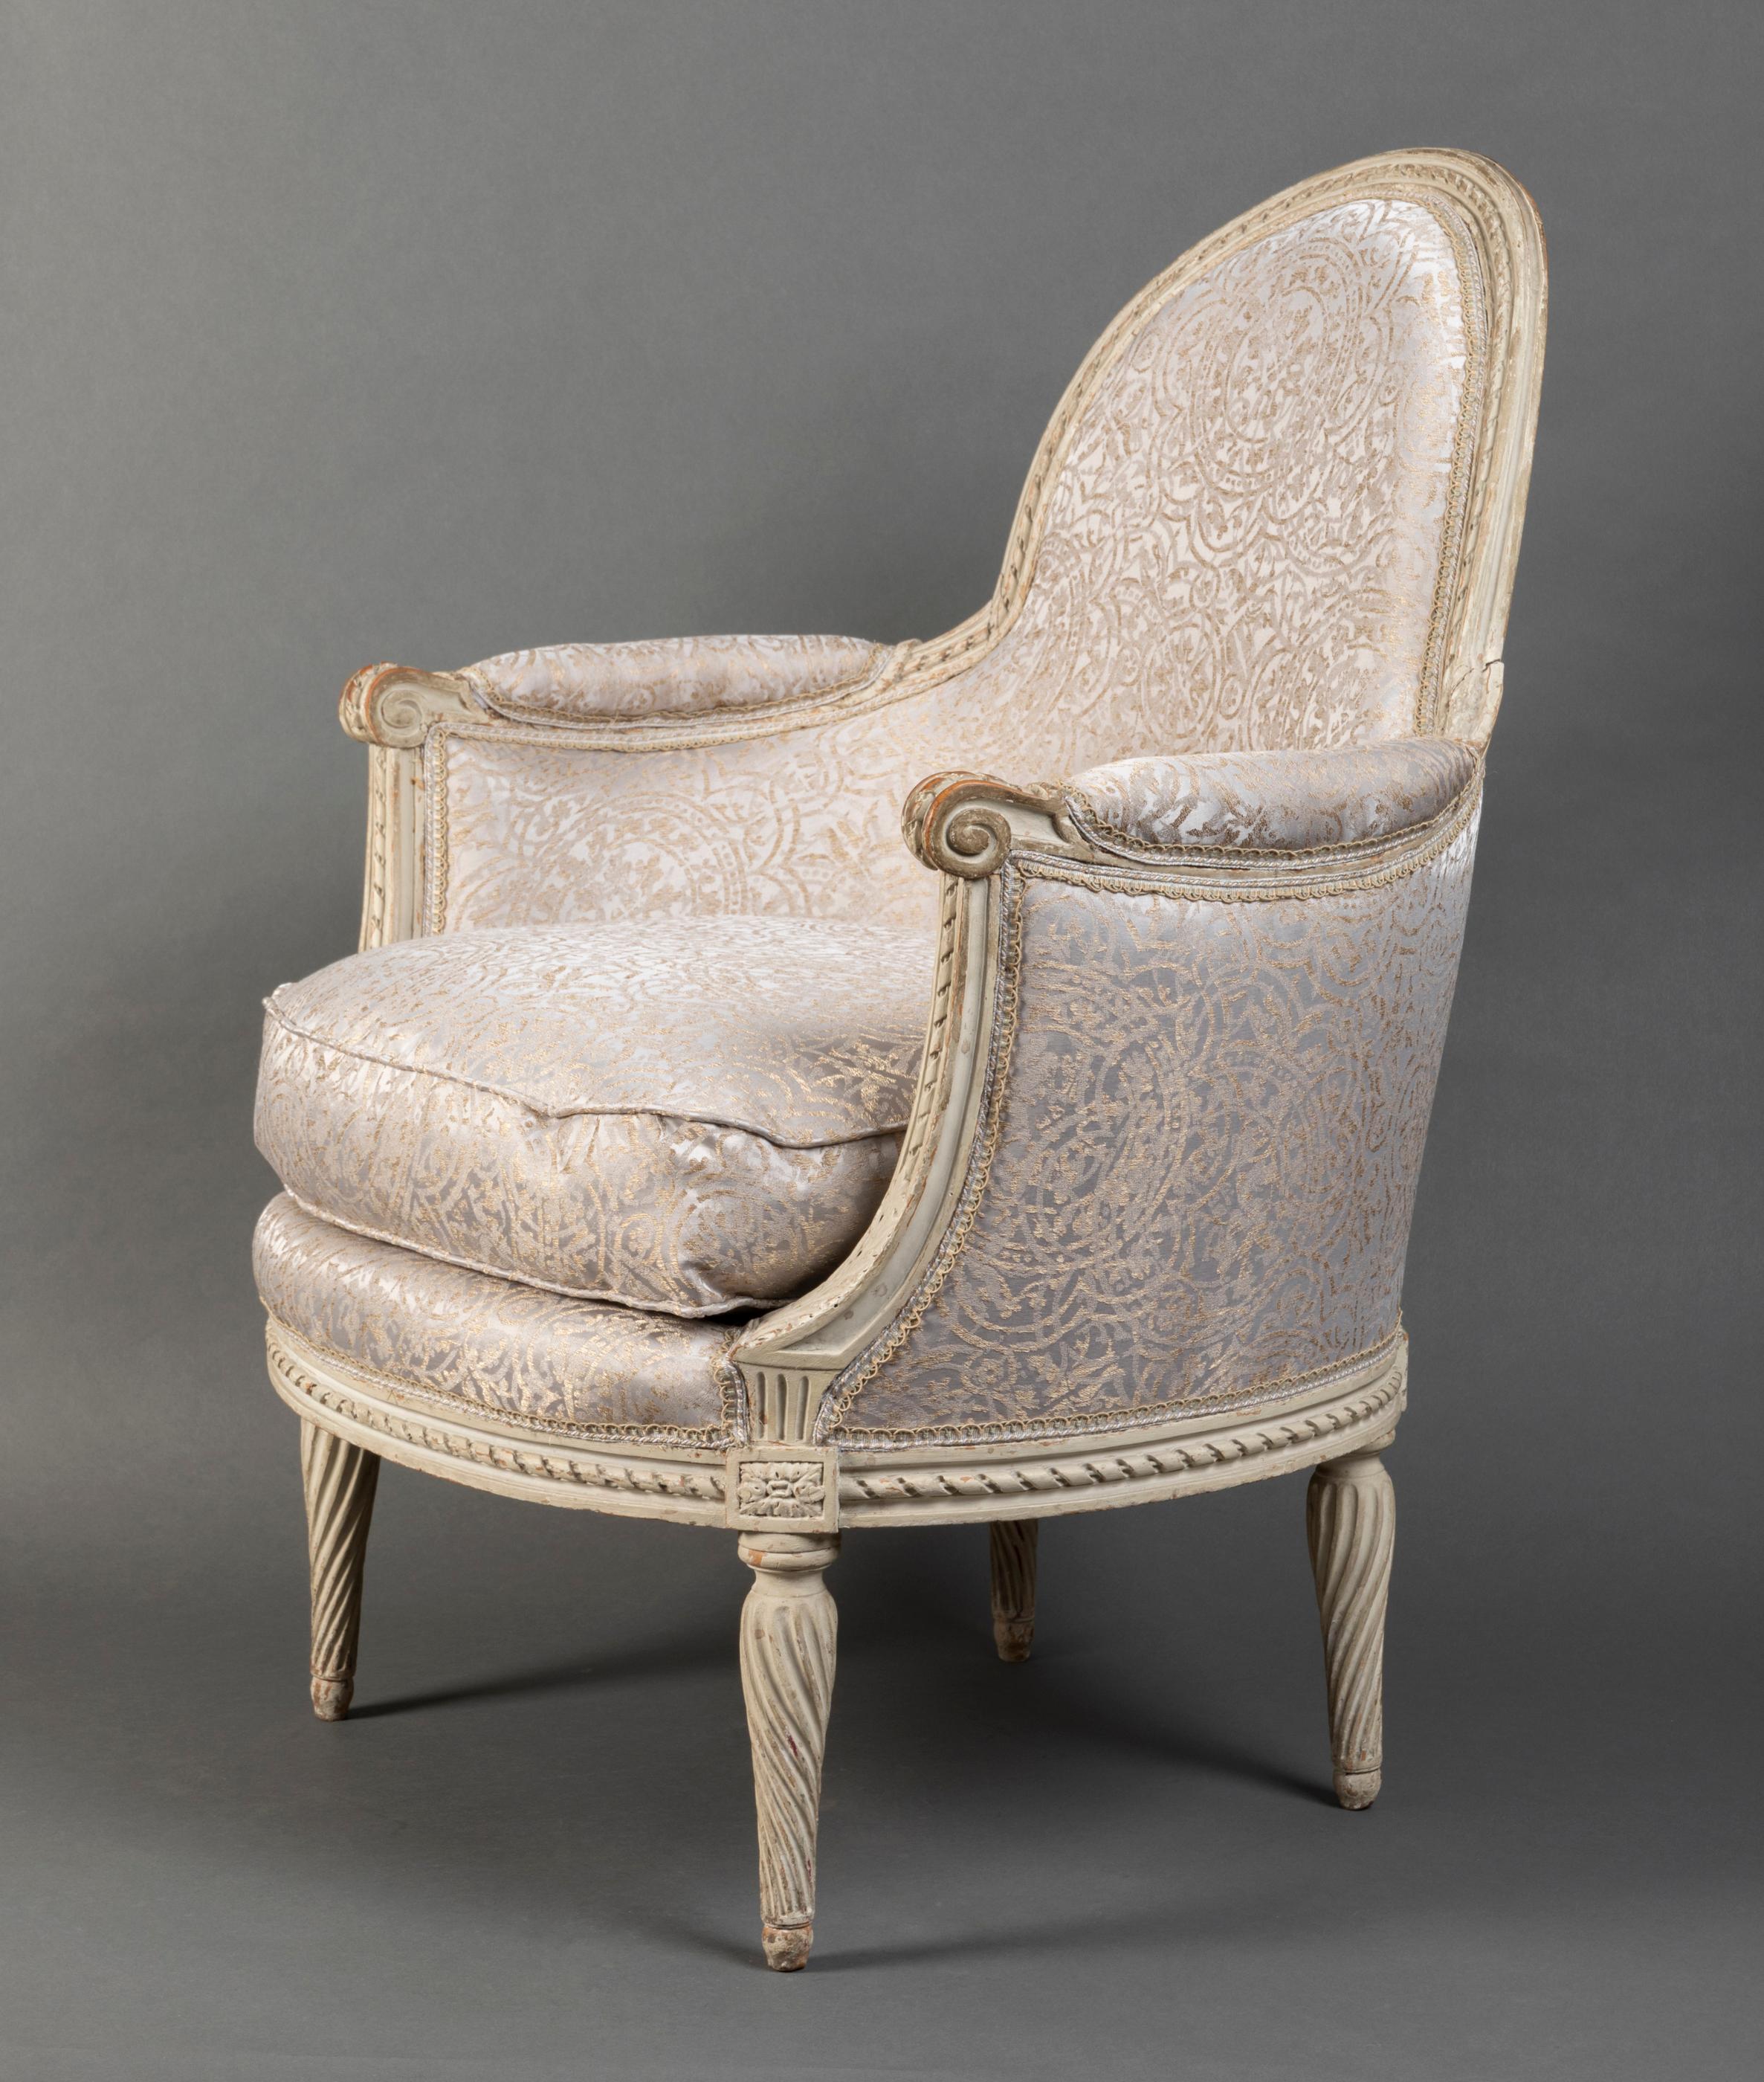 French Pair of Bergère Chairs from the Louis XVI Period Stamped, Delanois, 18th Century For Sale